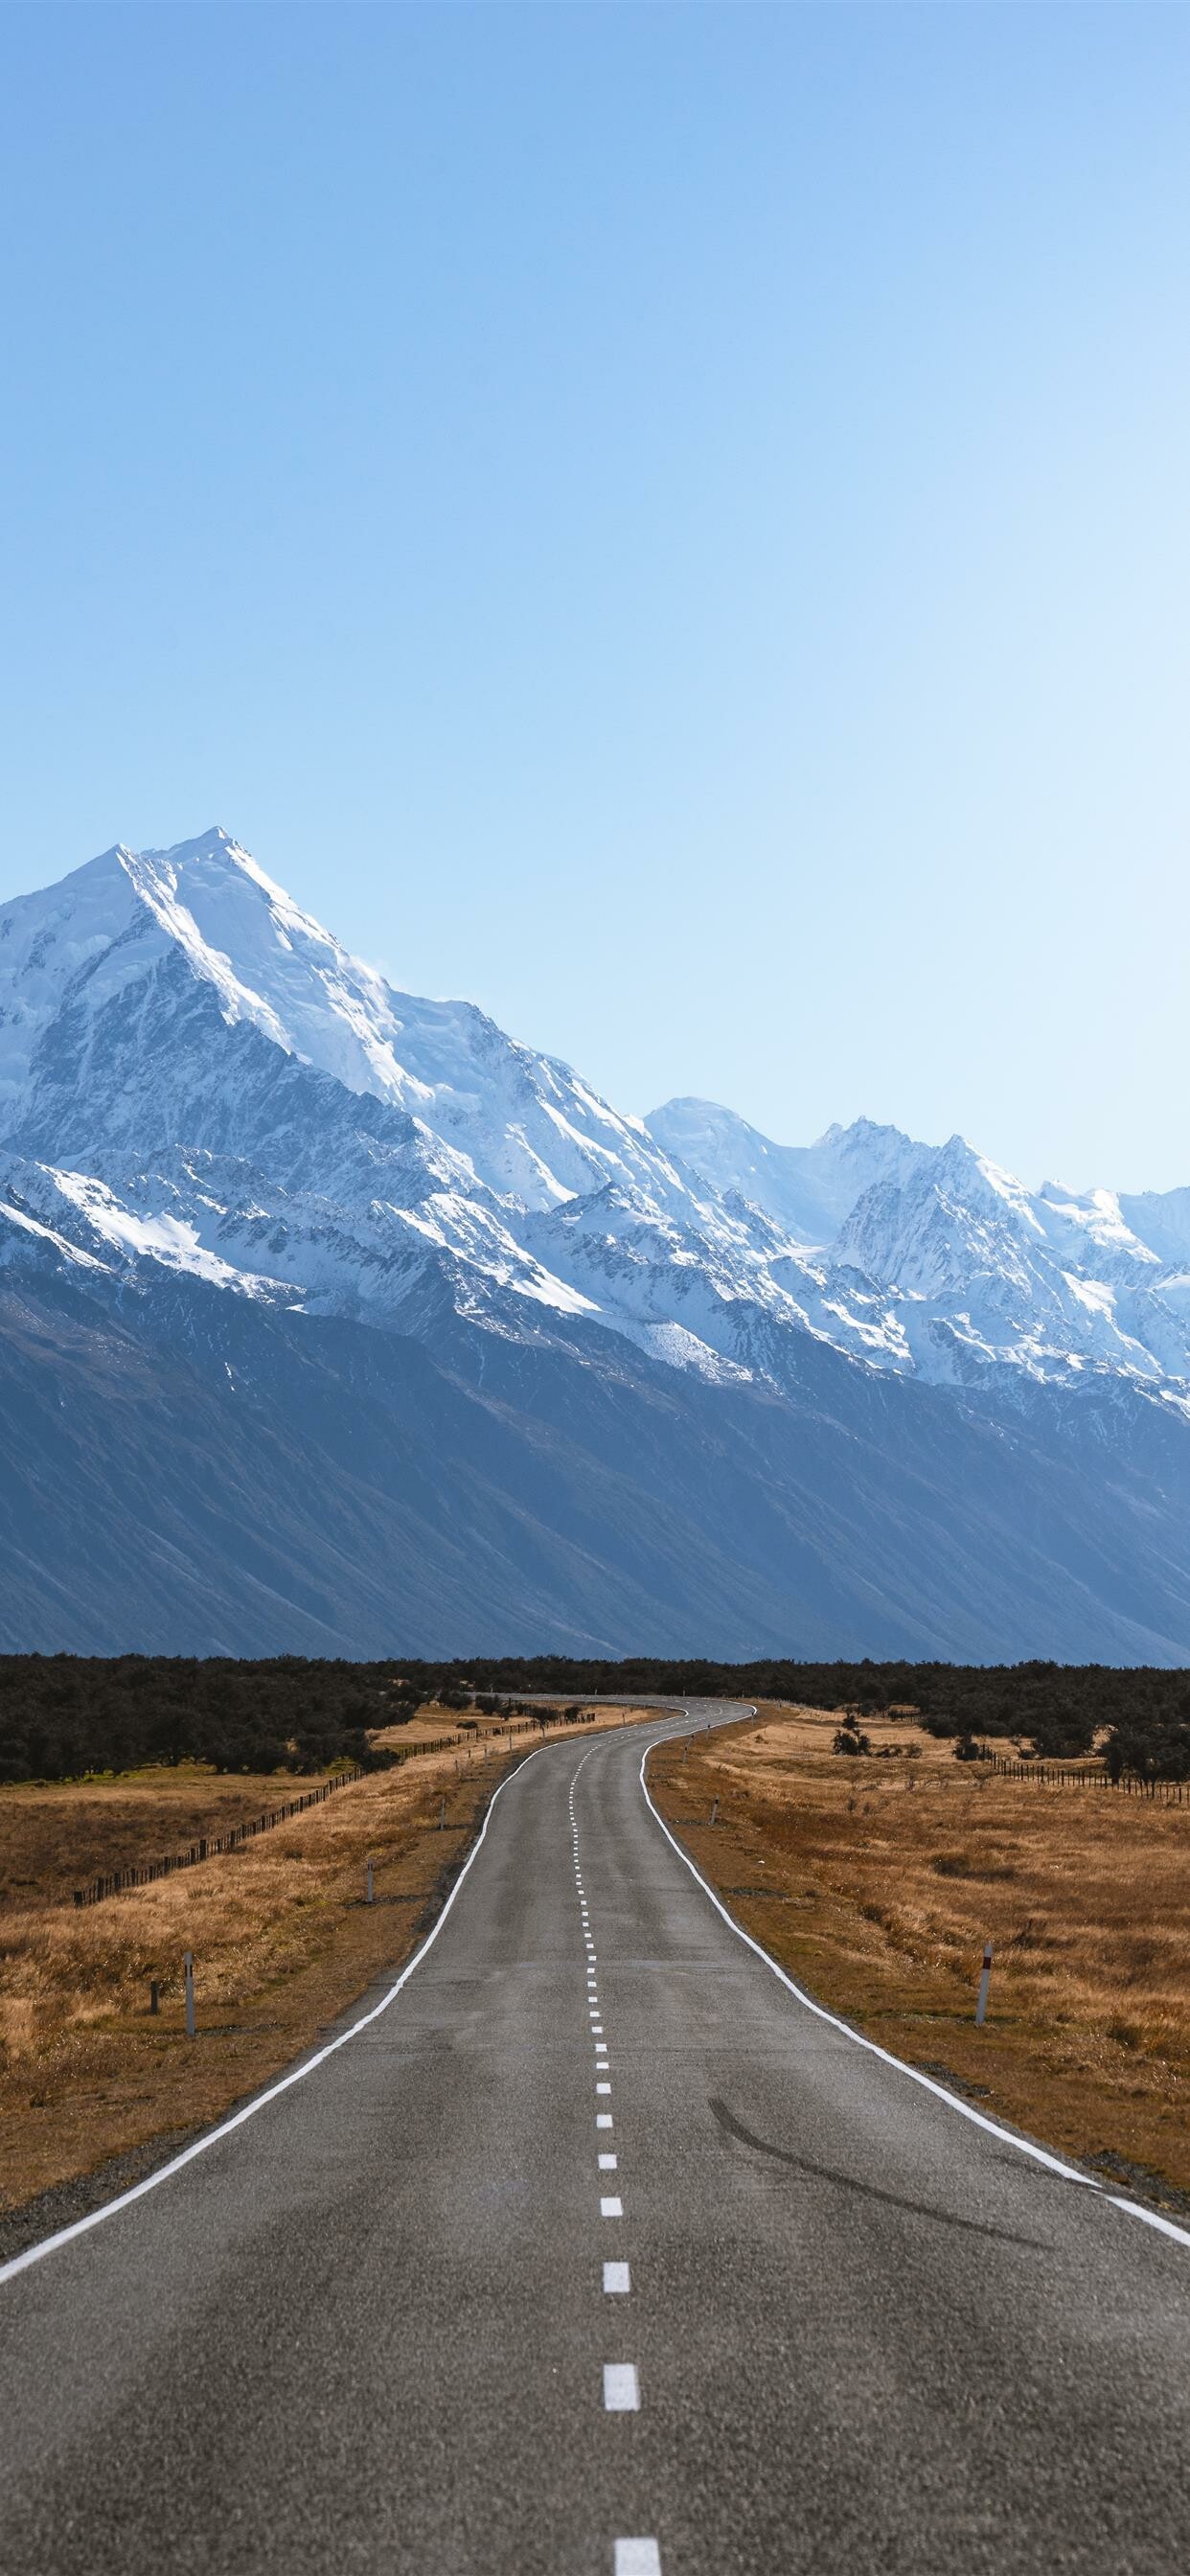 New Zealand: The Maori name for the country is Aoetaroa, Highland. 1250x2690 HD Wallpaper.